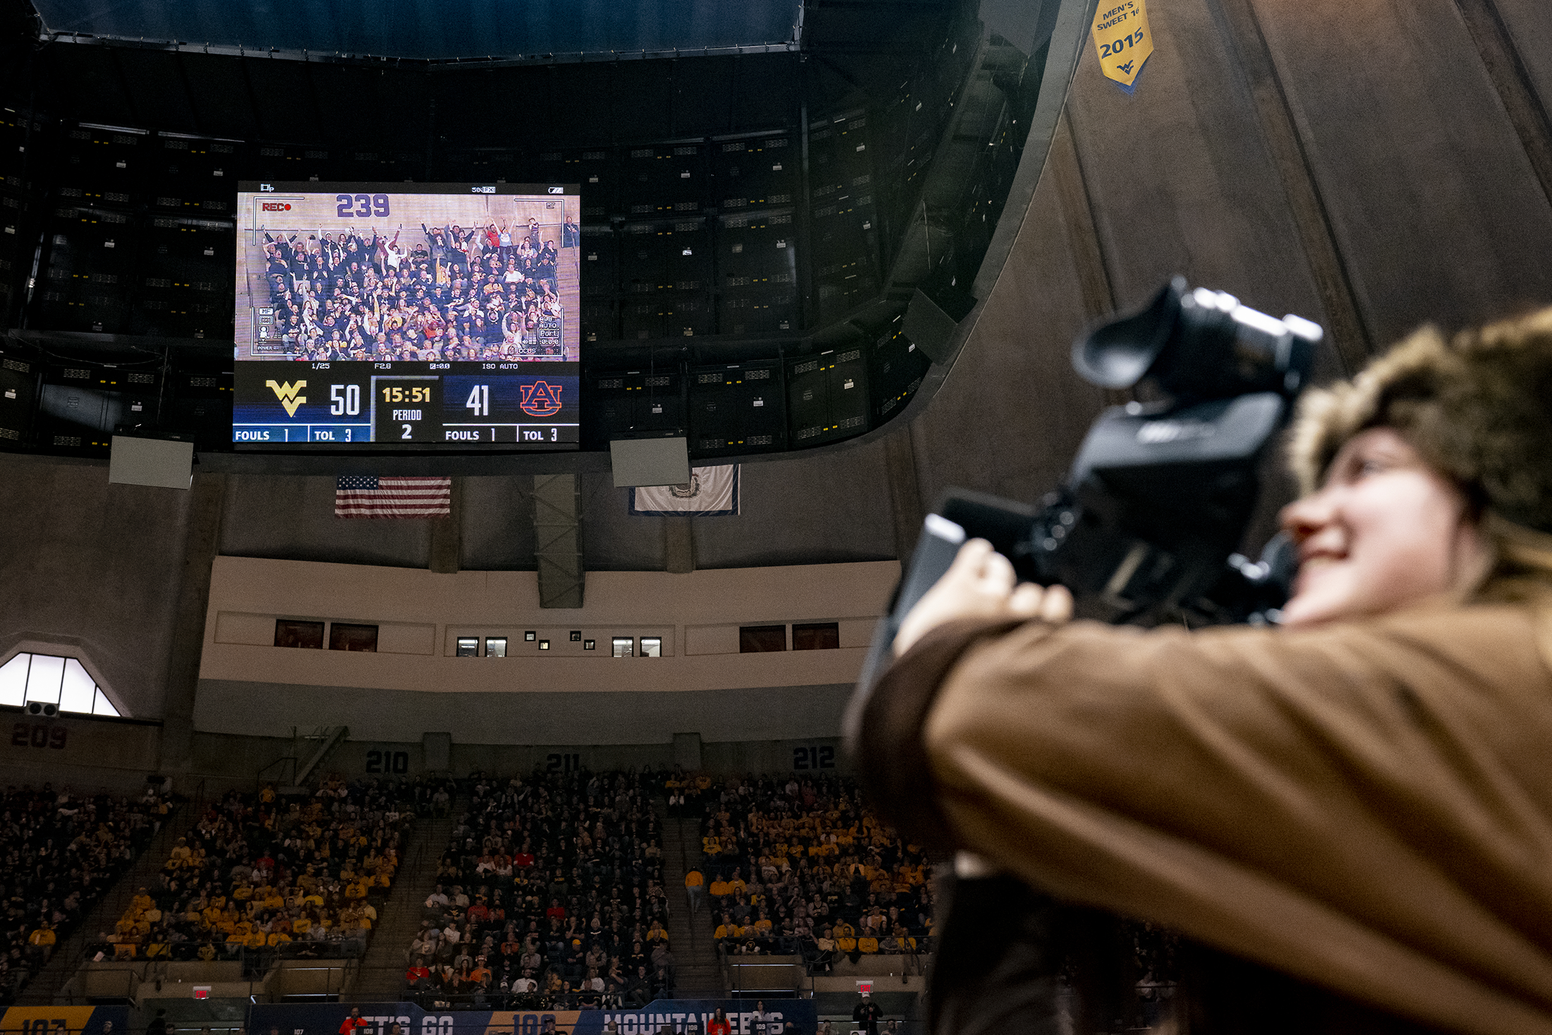 woman in buckskins holds video camera, large screen in background